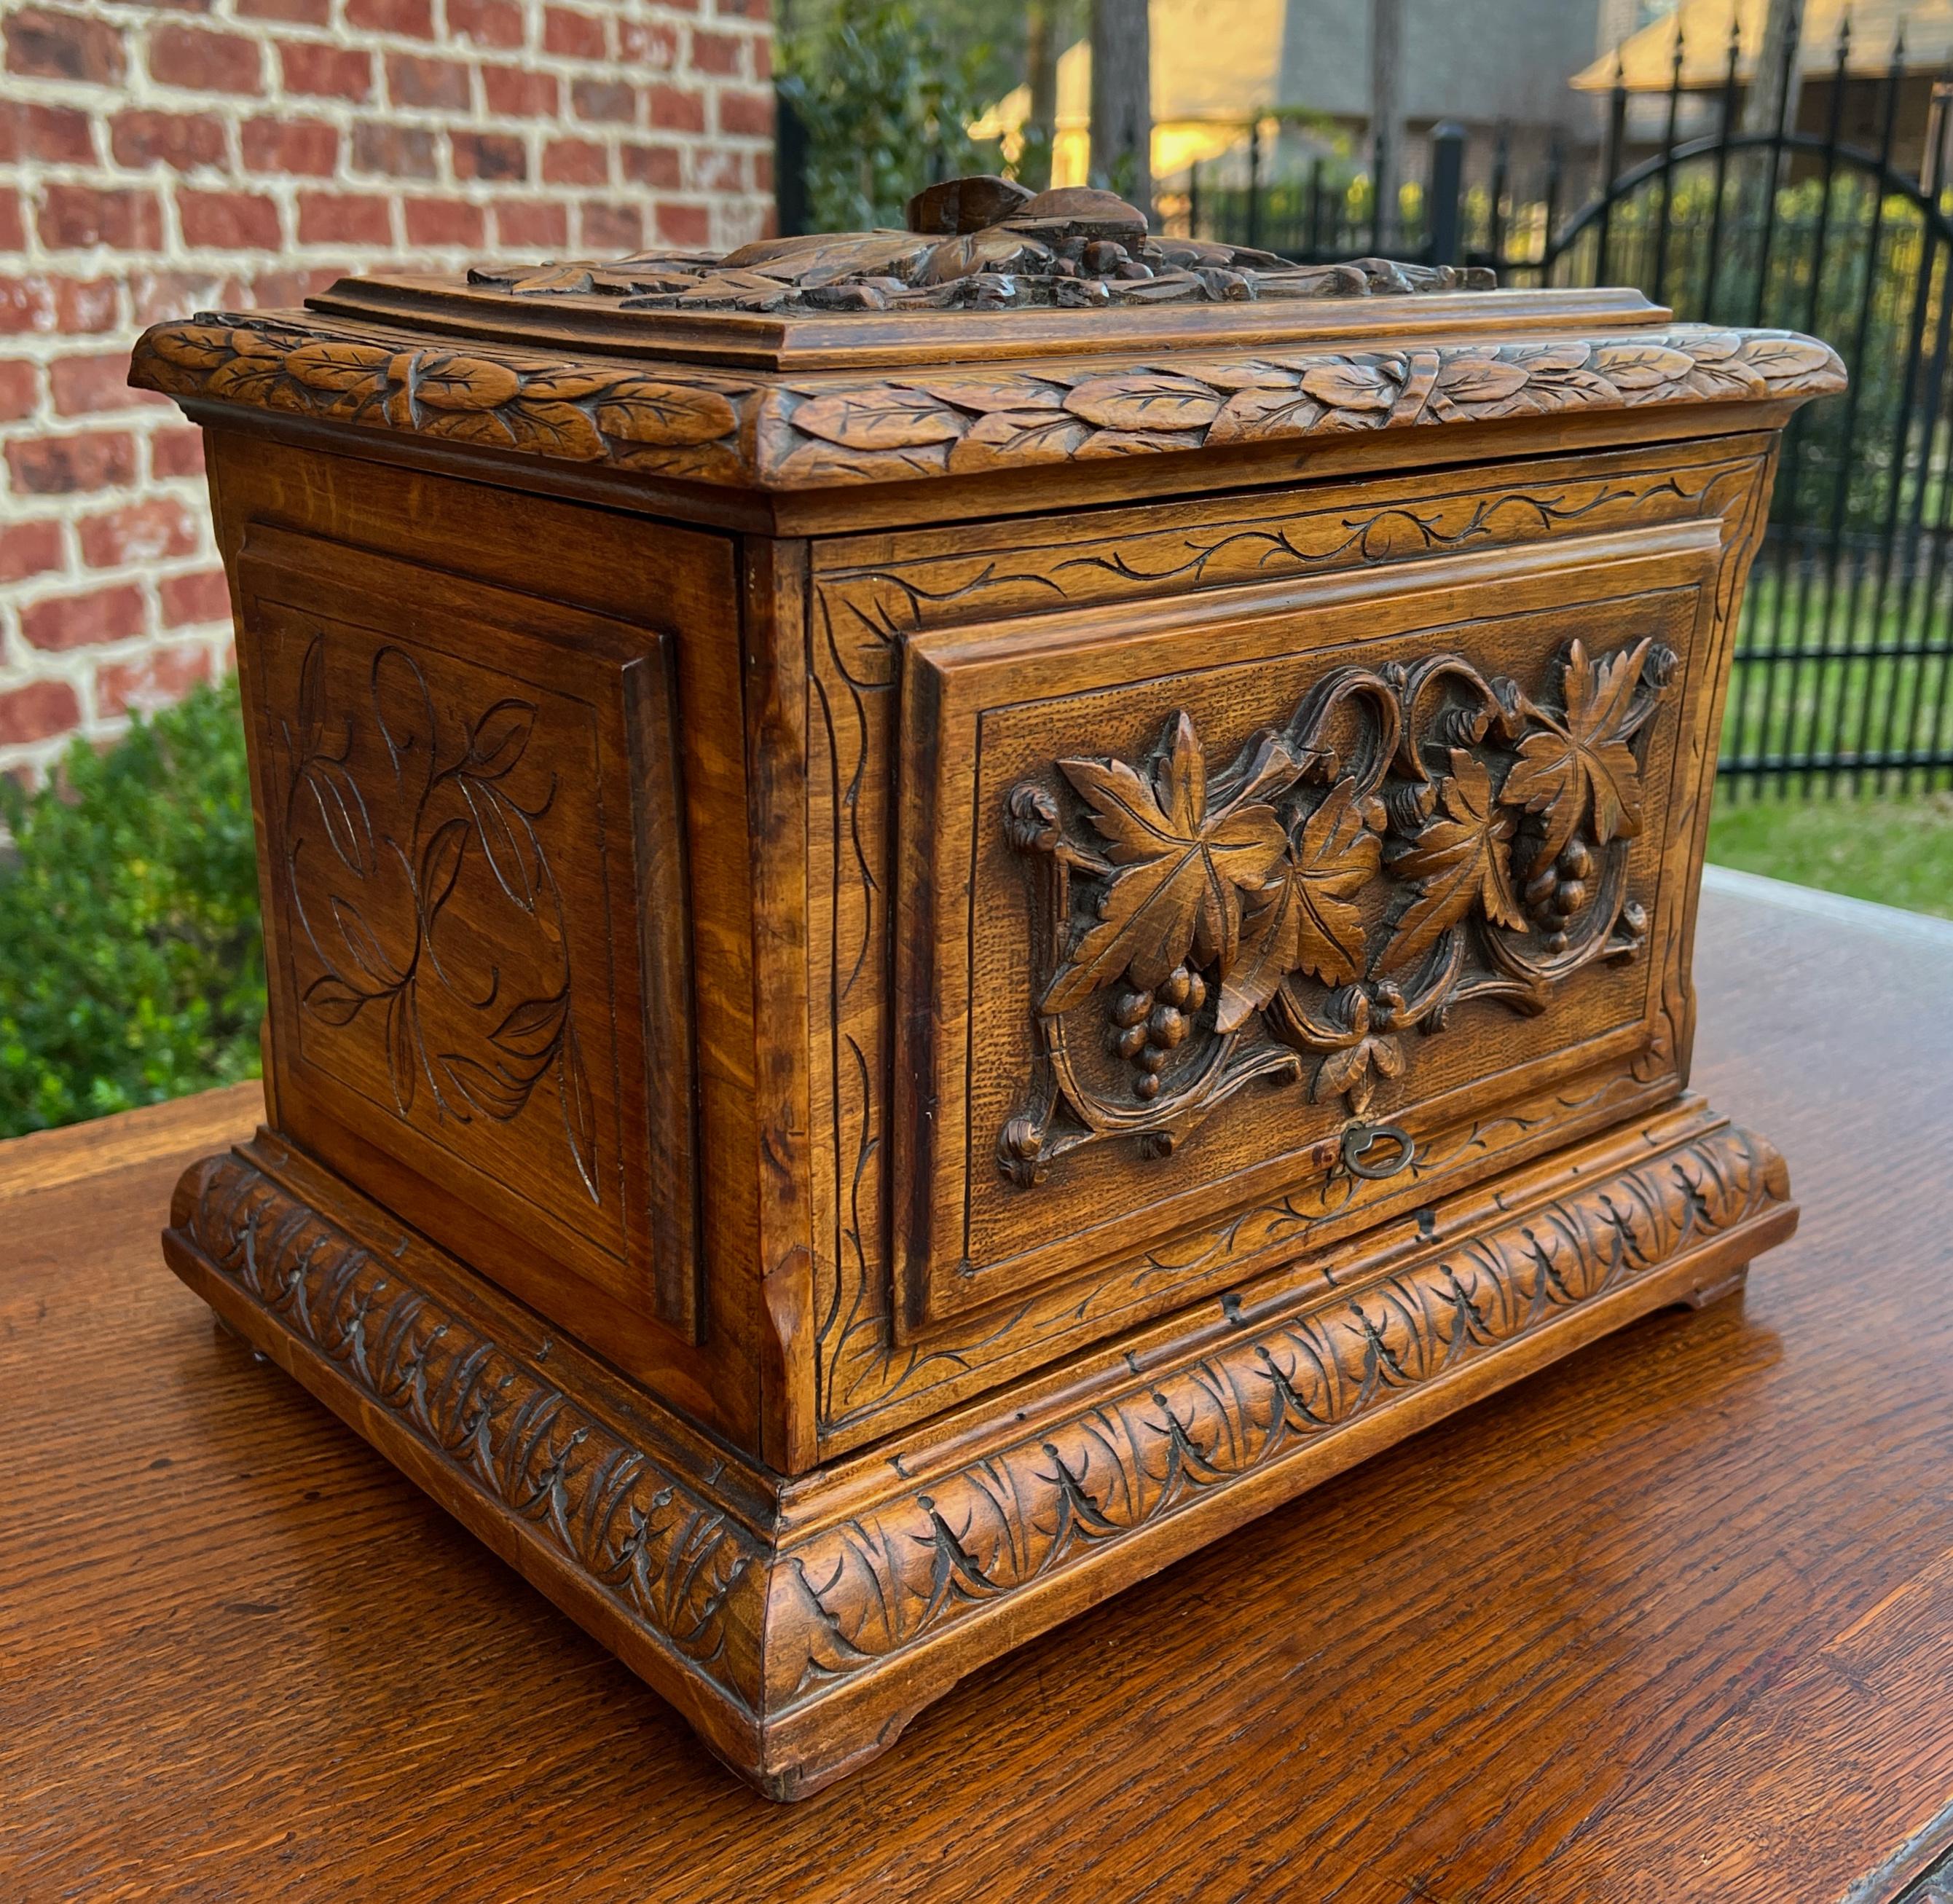 Carved Antique French Jewelry Accessory Box Black Forest Walnut 8 Interior Drawers 19C